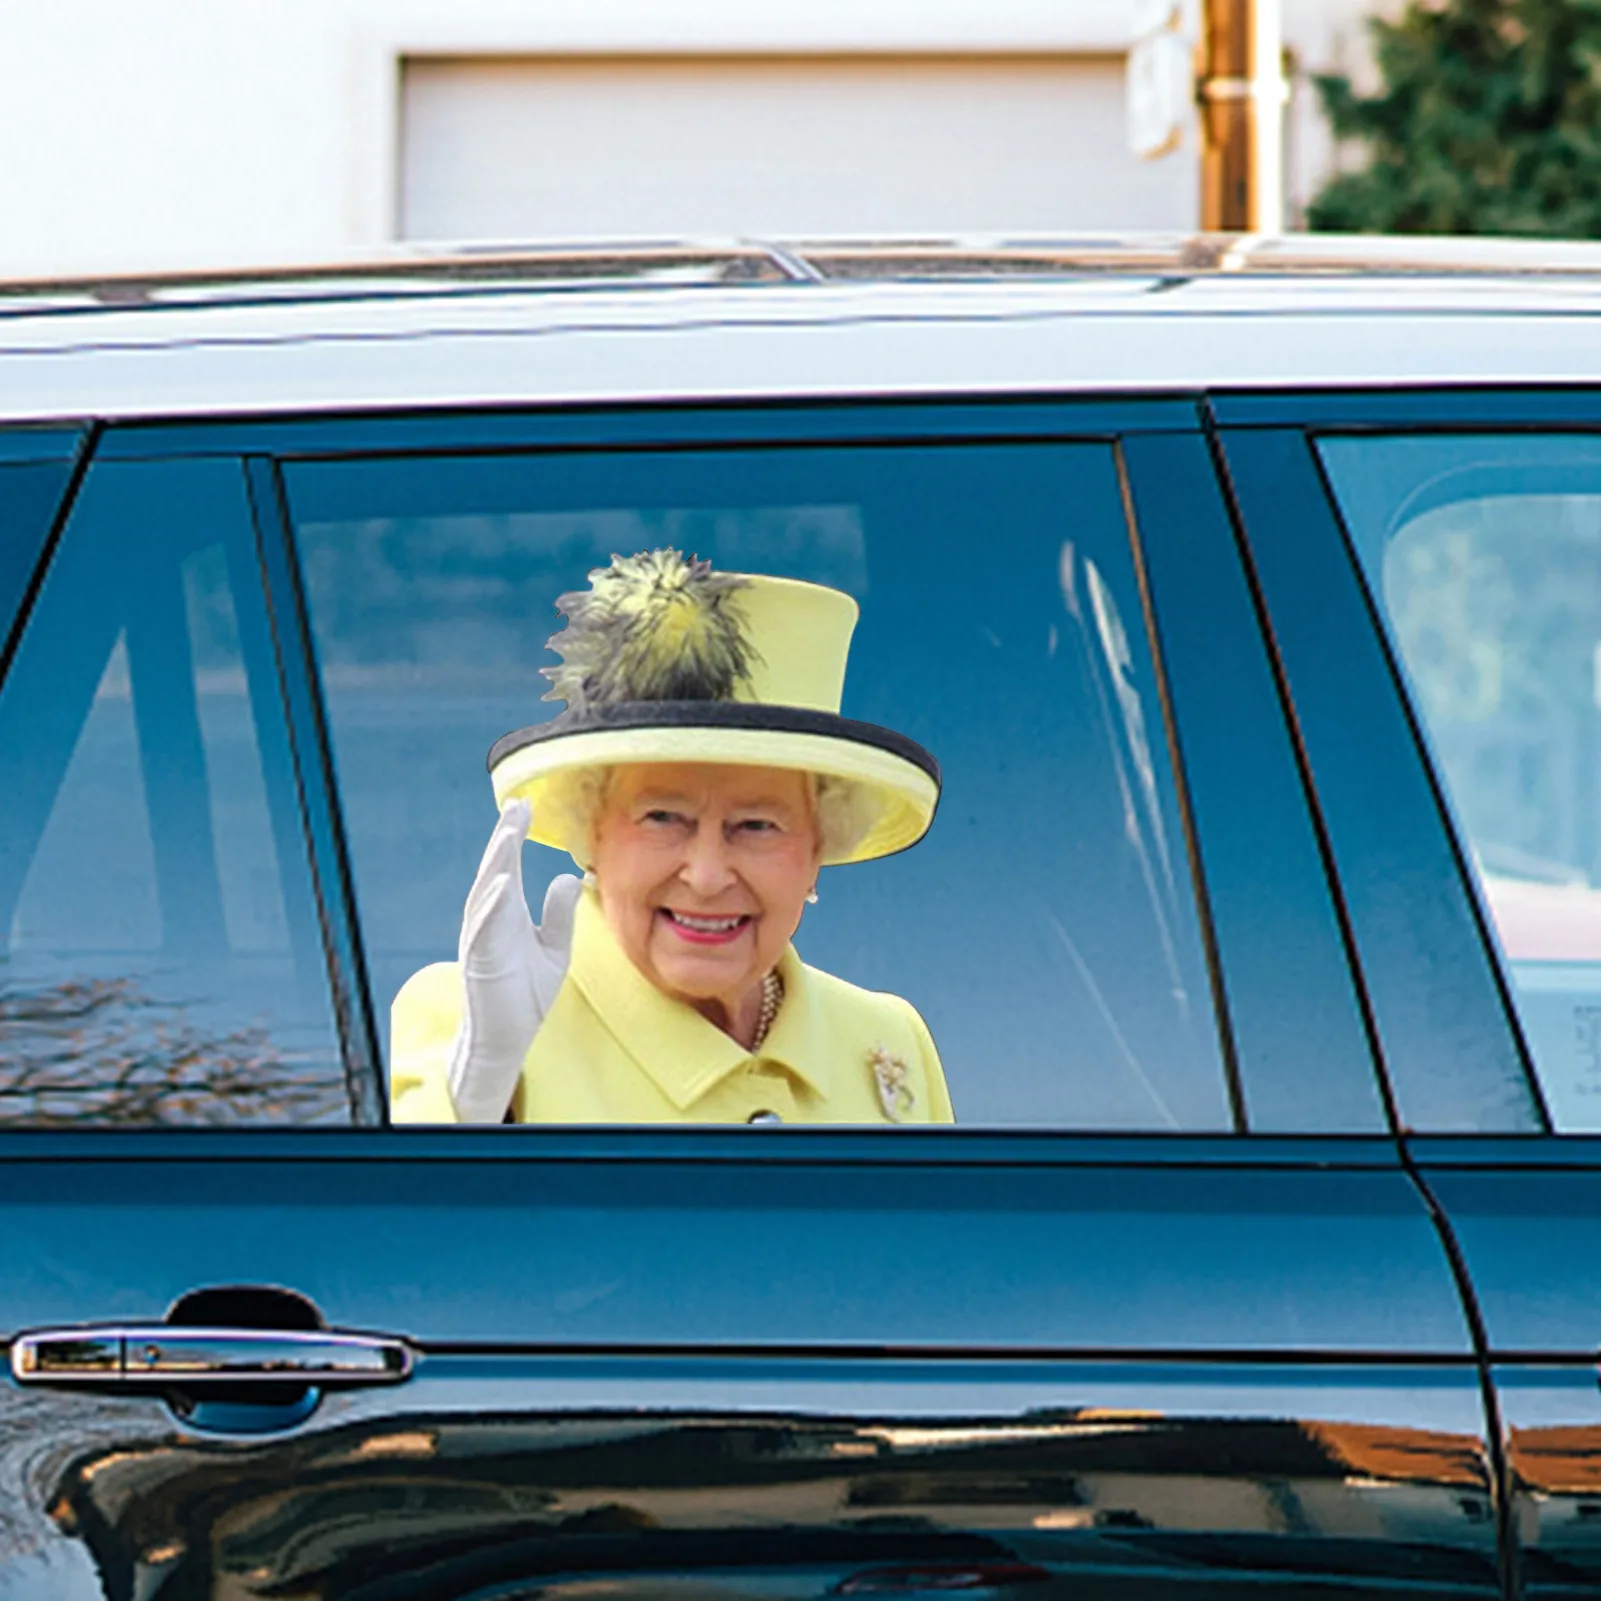 

Queen Elizabeth Sticker Car Window Decals Automotive Stickers For Vehicles Waterproof Funny Car Decal Decoration Multiple Styles